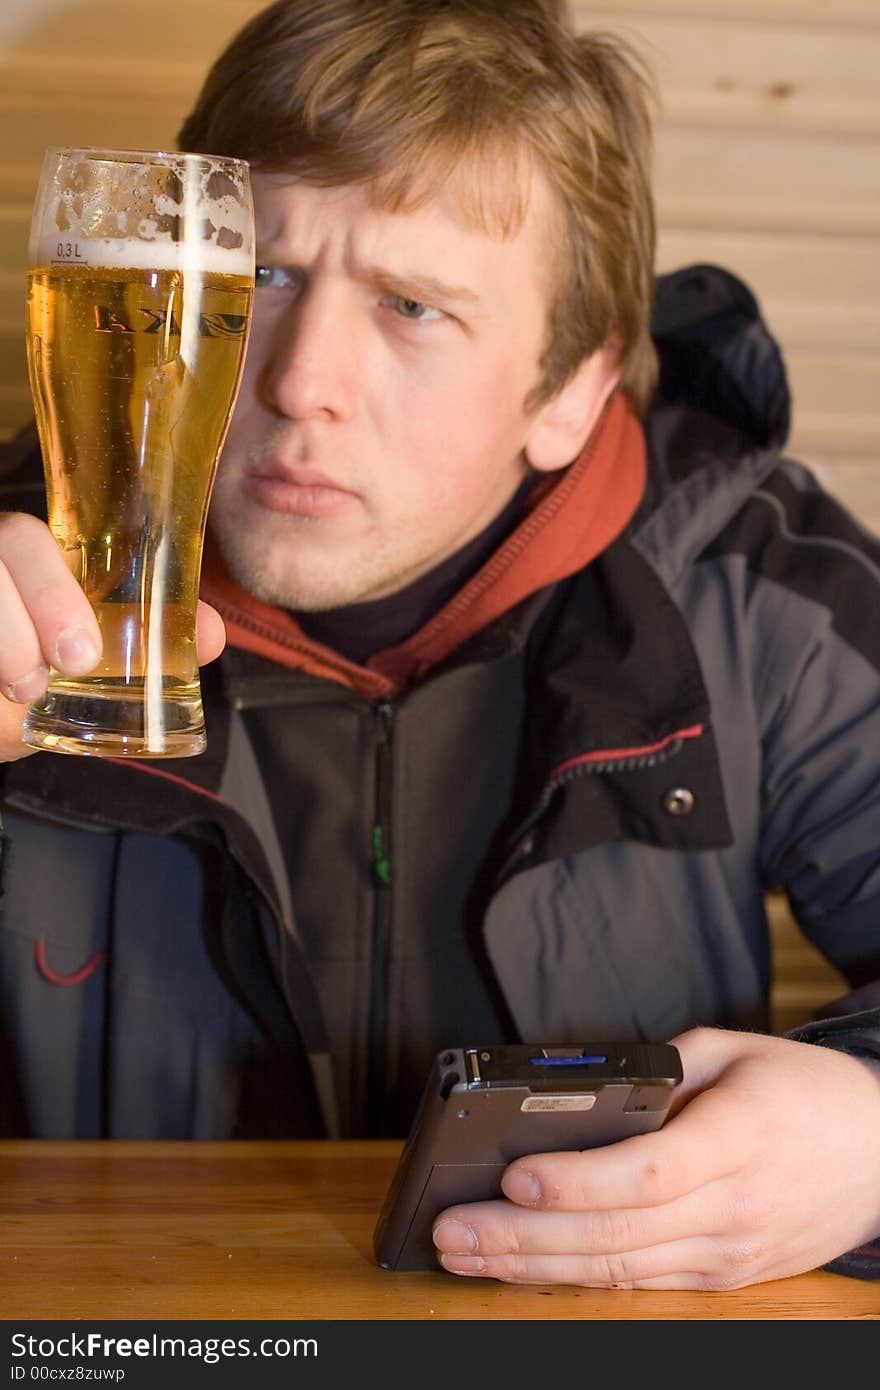 Man looking at beaker of beer and holding palm-size computer.